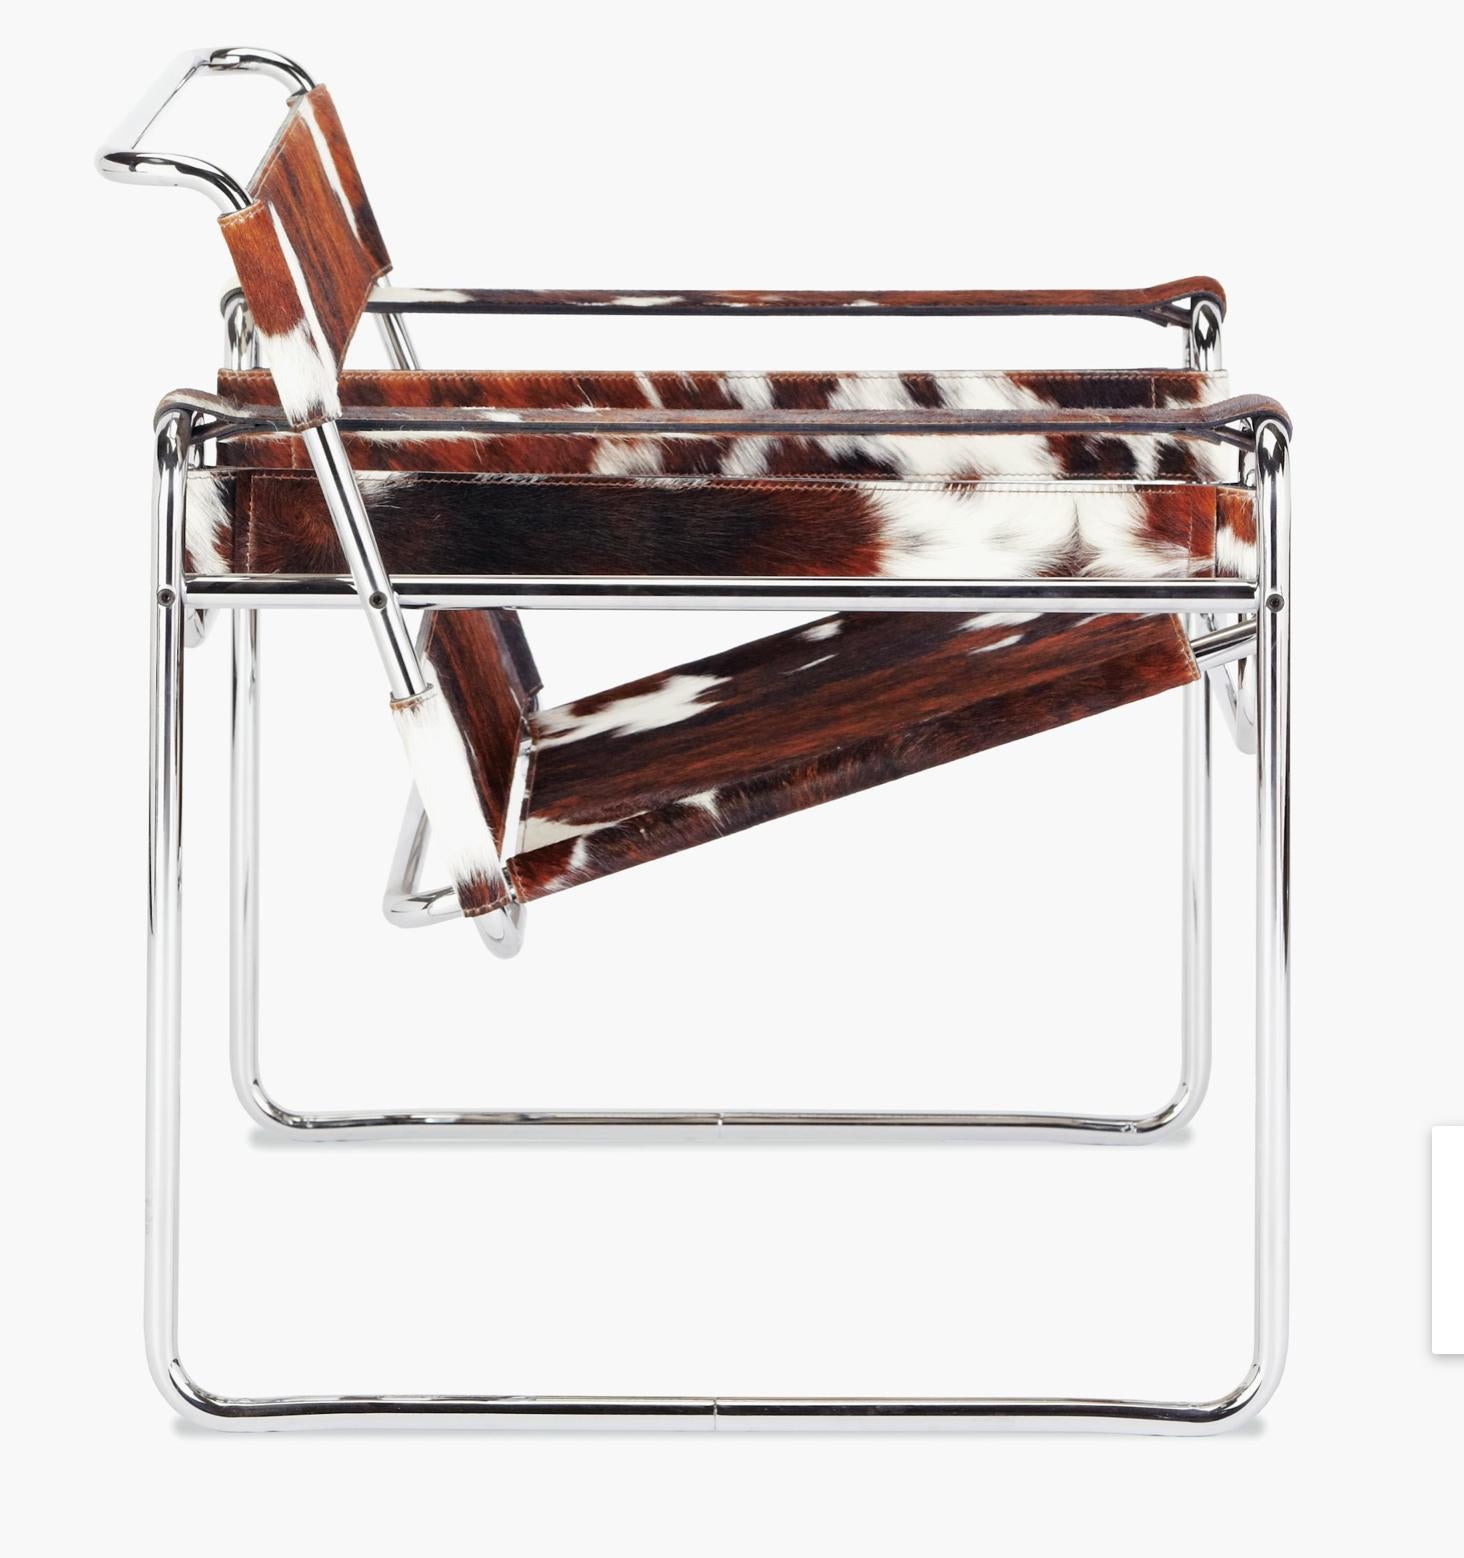 Marcel Breuer was an apprentice at the Bauhaus when he conceived the world’s first tubular steel chair. Inspired by the frame of a bicycle, a product he greatly admired for its functional design, Breuer saw tubular steel as a way of building a more